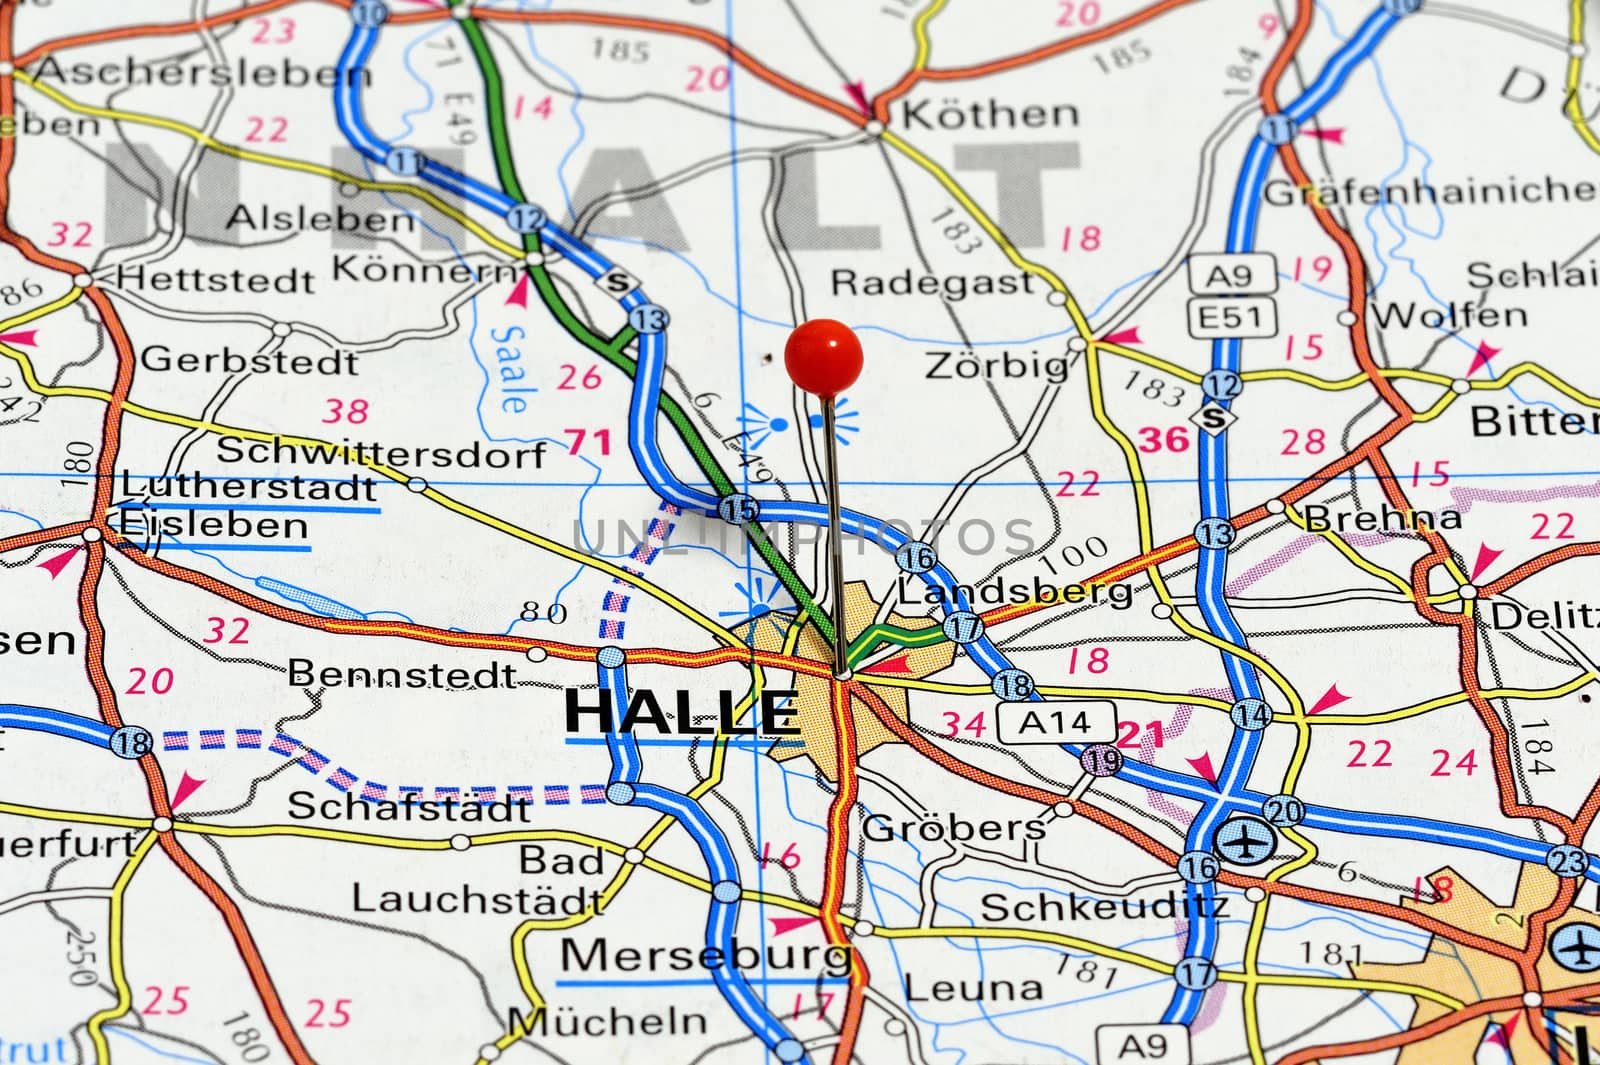 Closeup of Halle, Halle is the German state of Saxony-Anhalt's largest city, situated on the River Saale.